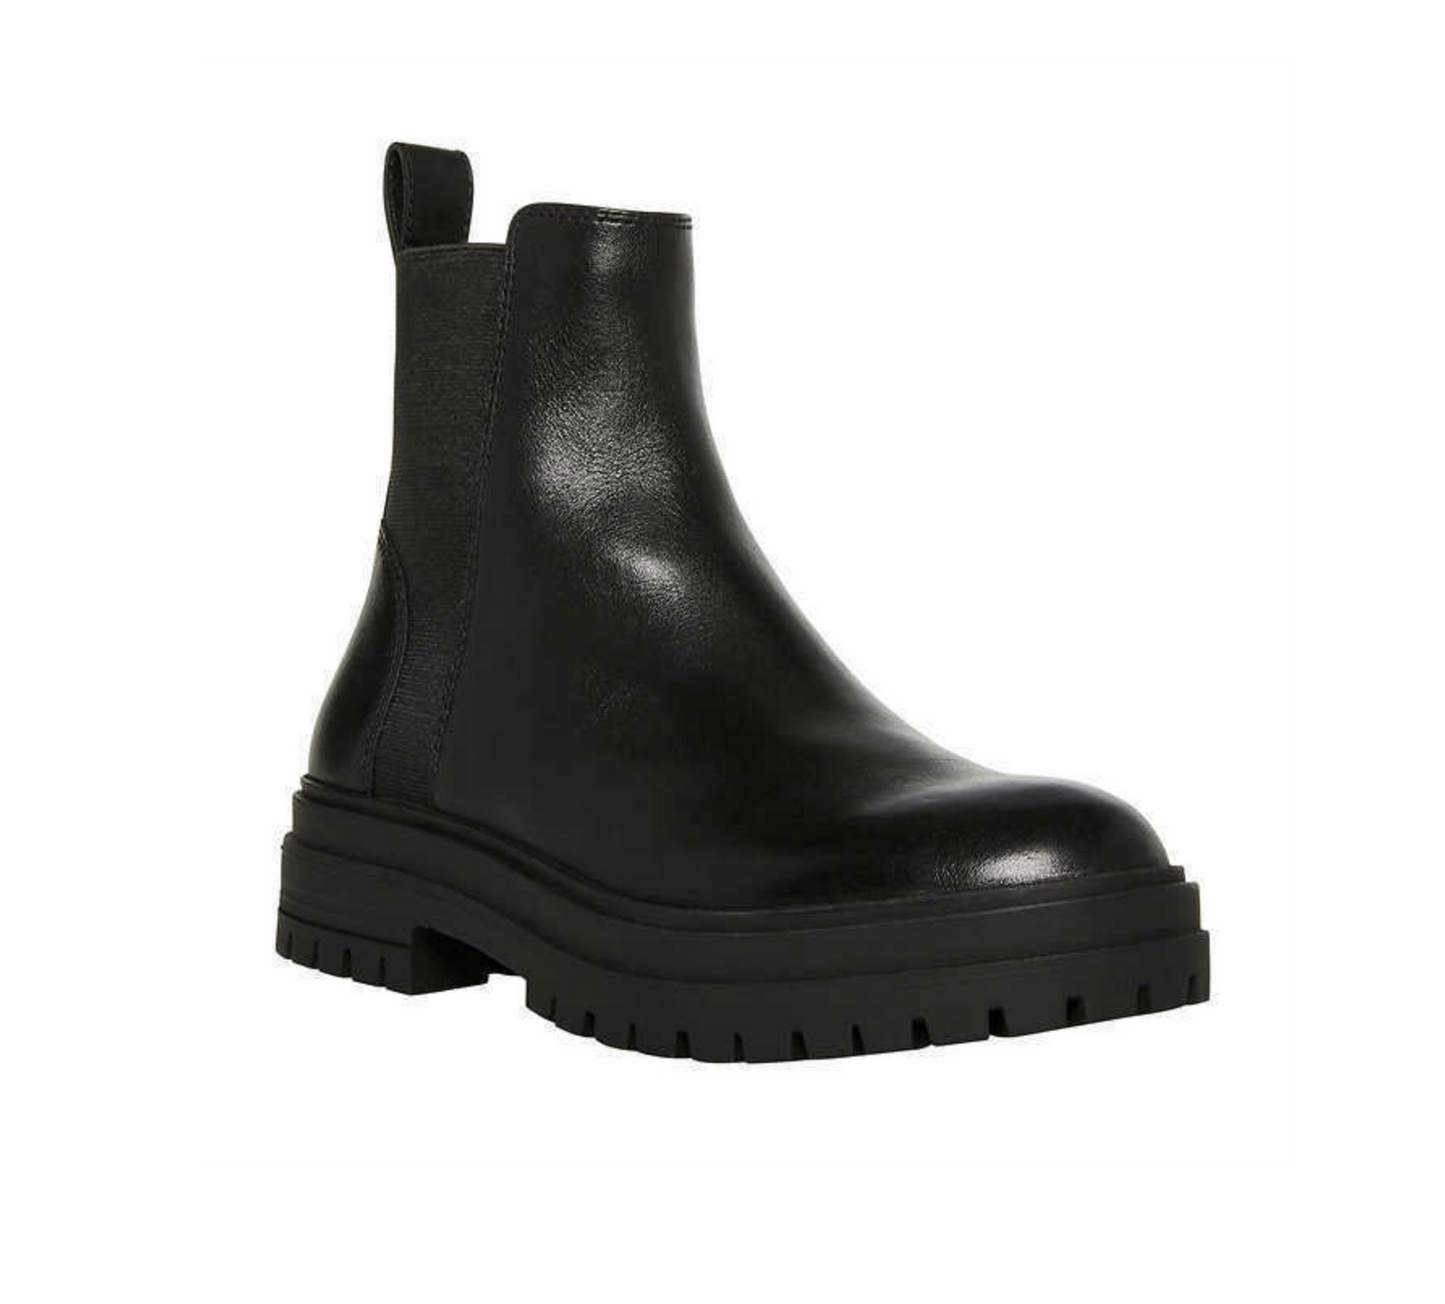 MustHaves(Fall&Winter)♥ Steve Madden Leather Chelsea Boots